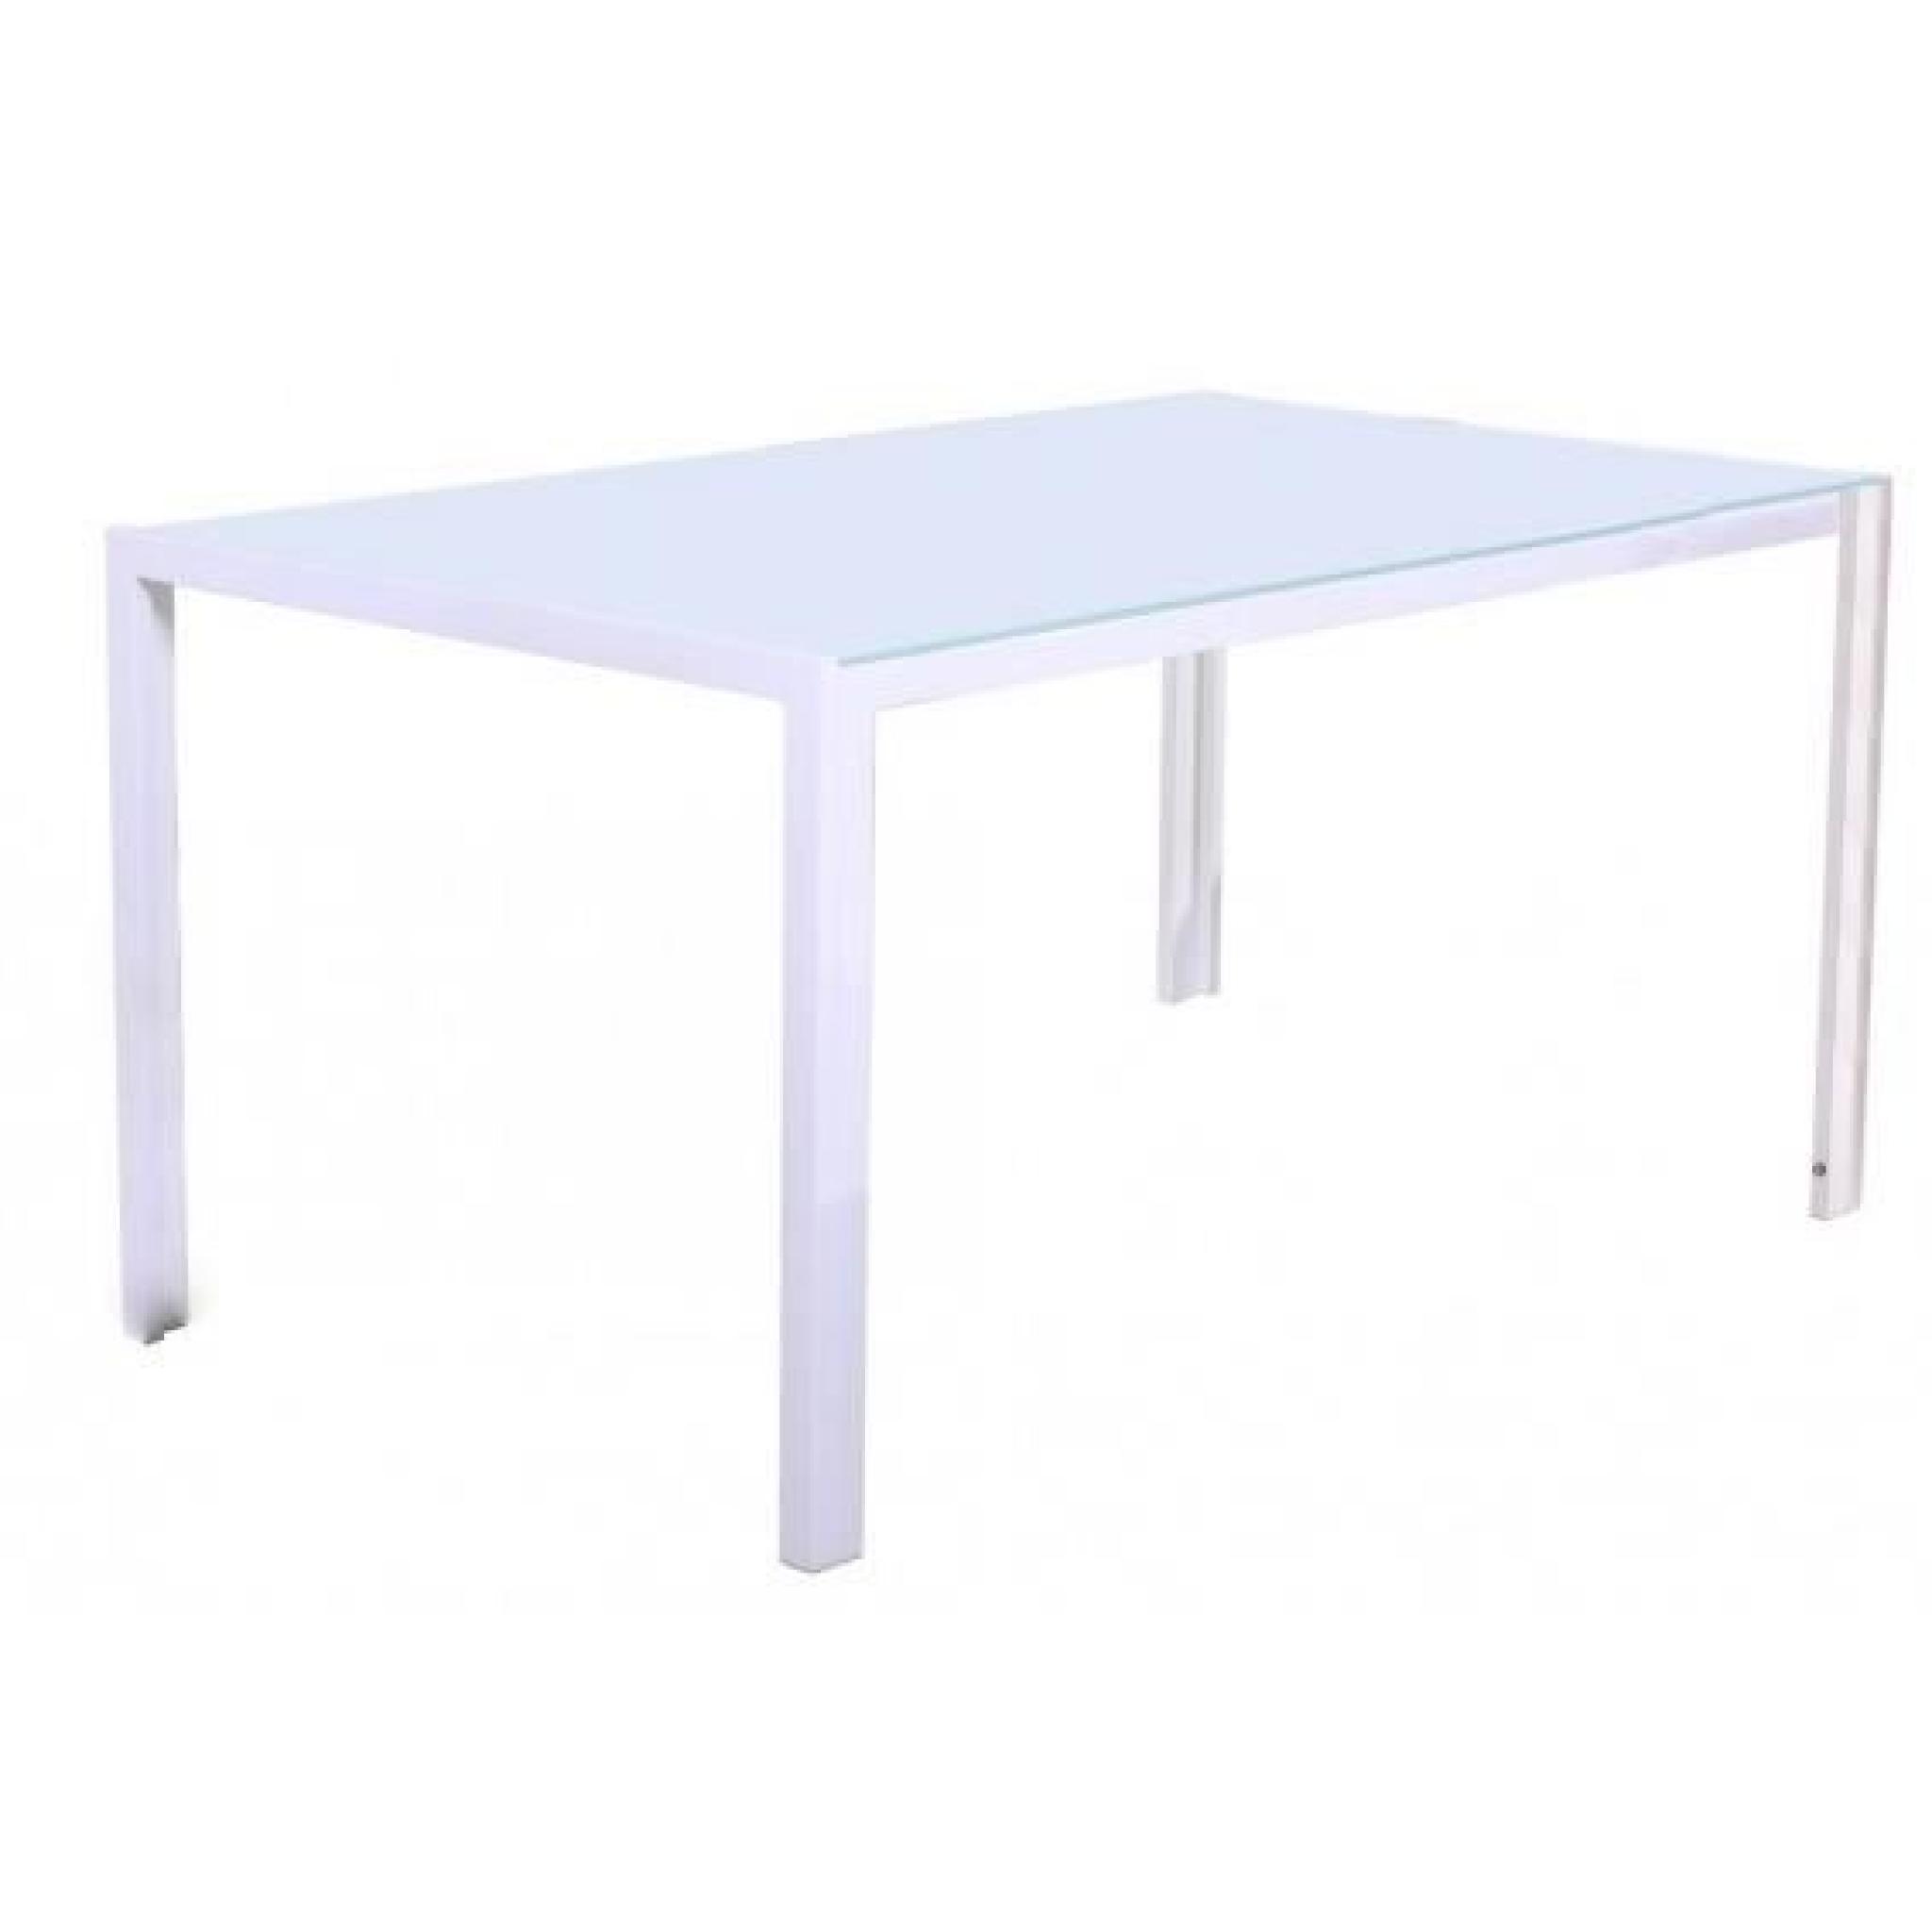 Alice - Table Rectangulaire Blanche